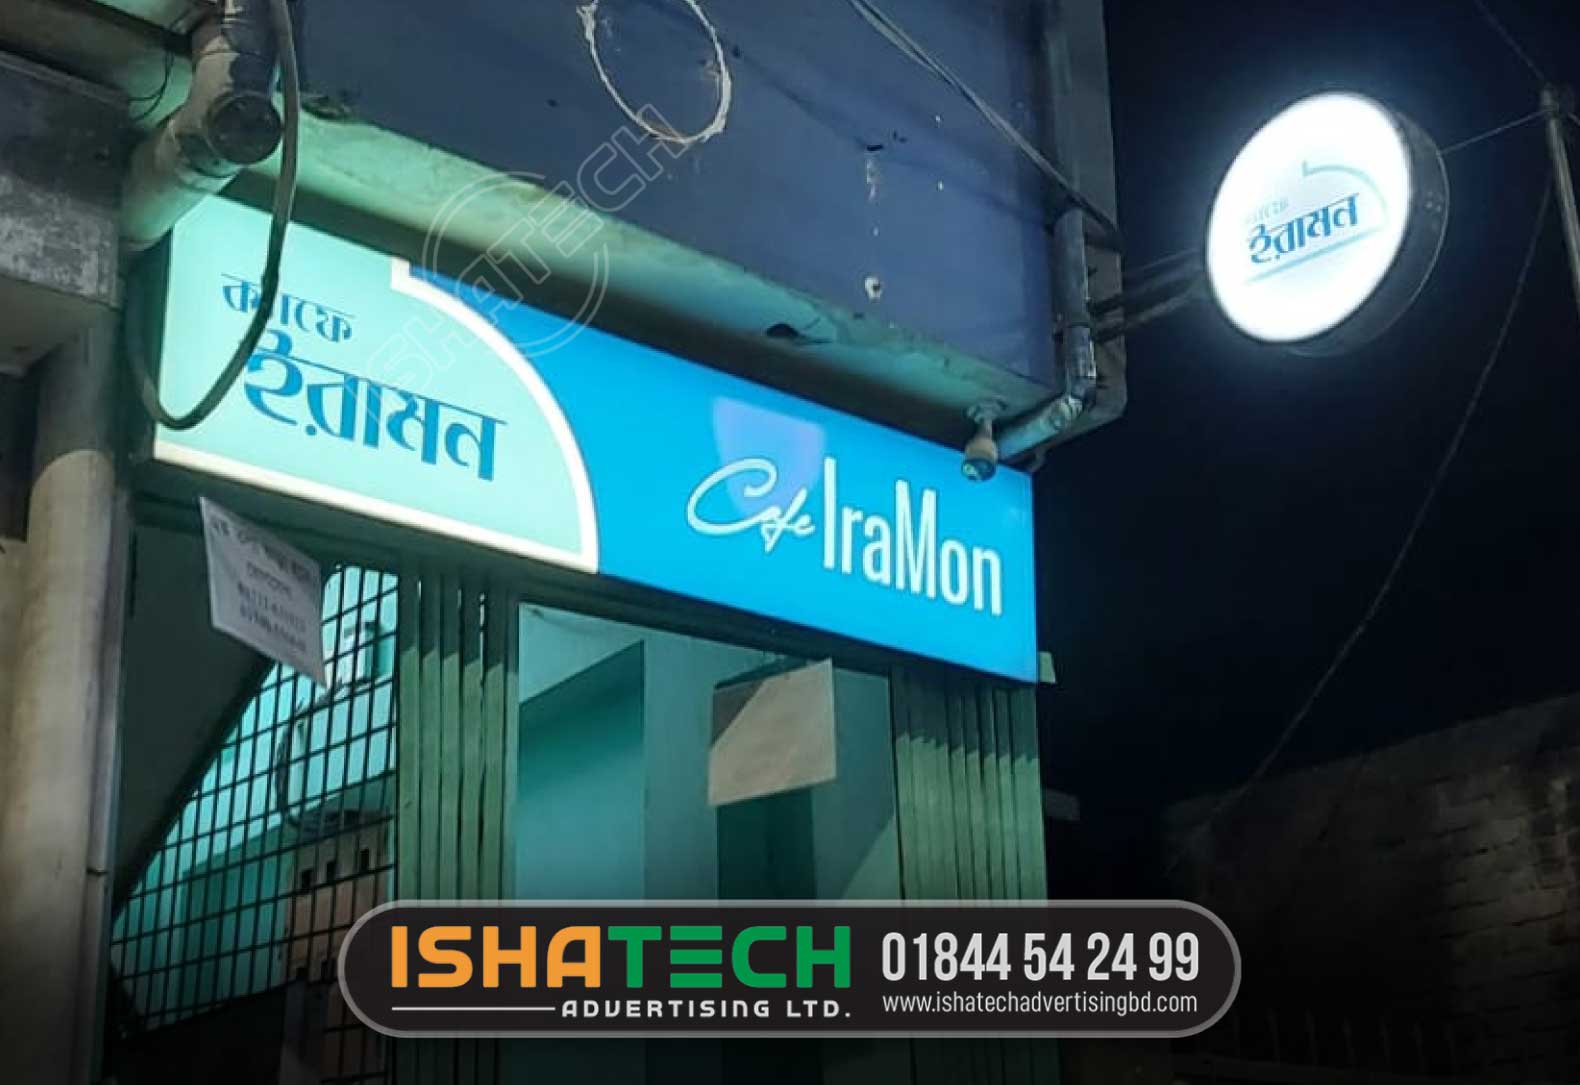 Design of Pharmacy Signboards. Superior LED sign and superior digital signage. Banner for Pharmacy. Signboard for Pharmacy Shop. Bangladeshi pharmacy industry. Personalized Pharmacy Shop Decals | Stickers.